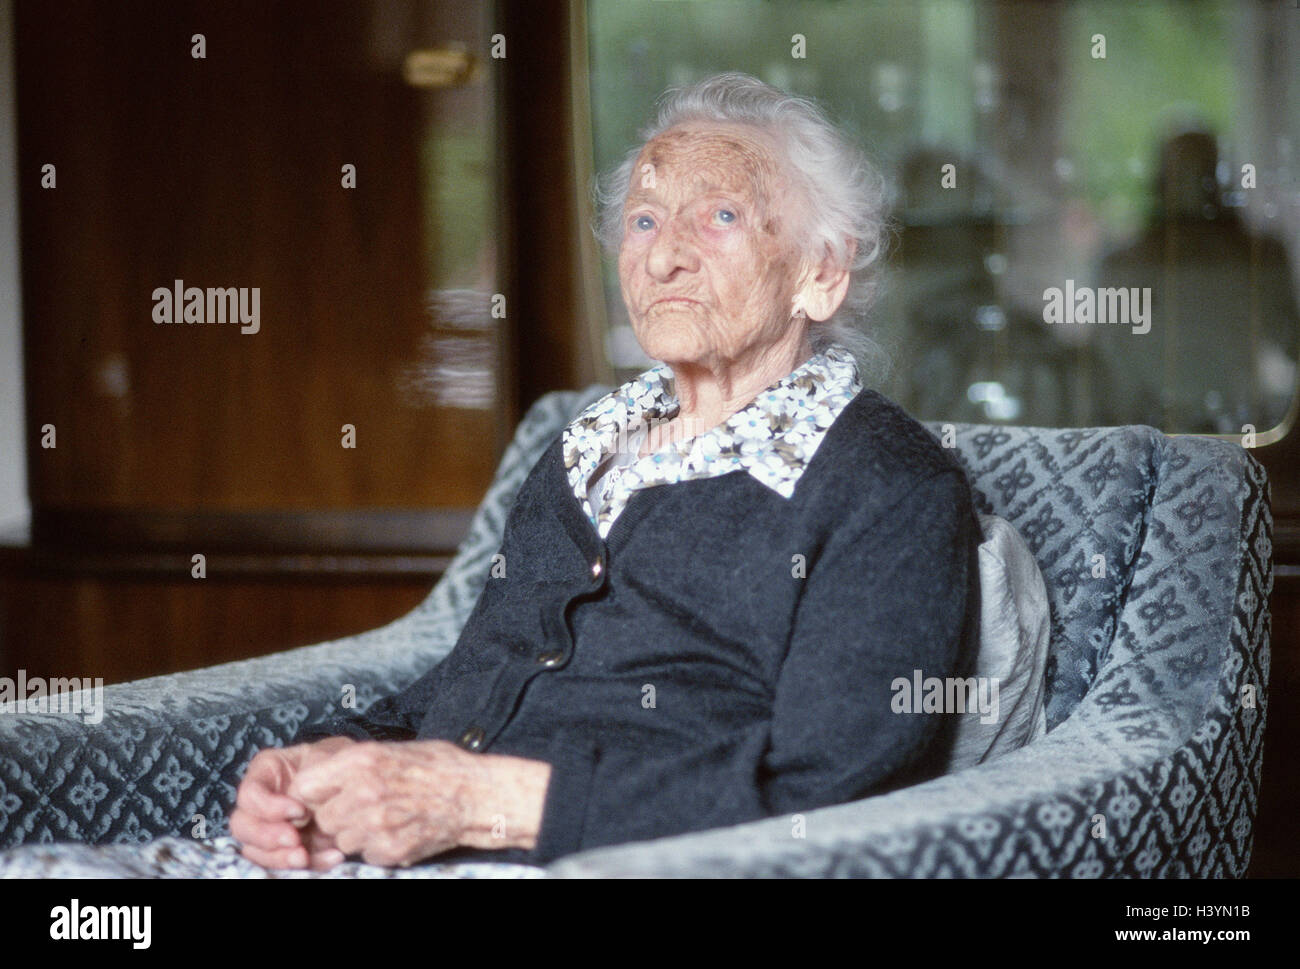 Senior, sitting room, sit, think lonely, alone, thoughtful, woman, old, old  person, 94 years, old woman, pensioner, senior citizens, consider, thought,  worries, worried, meditative, deepens, dealts with, depressed, unhappily,  loneliness, loneliness, isola